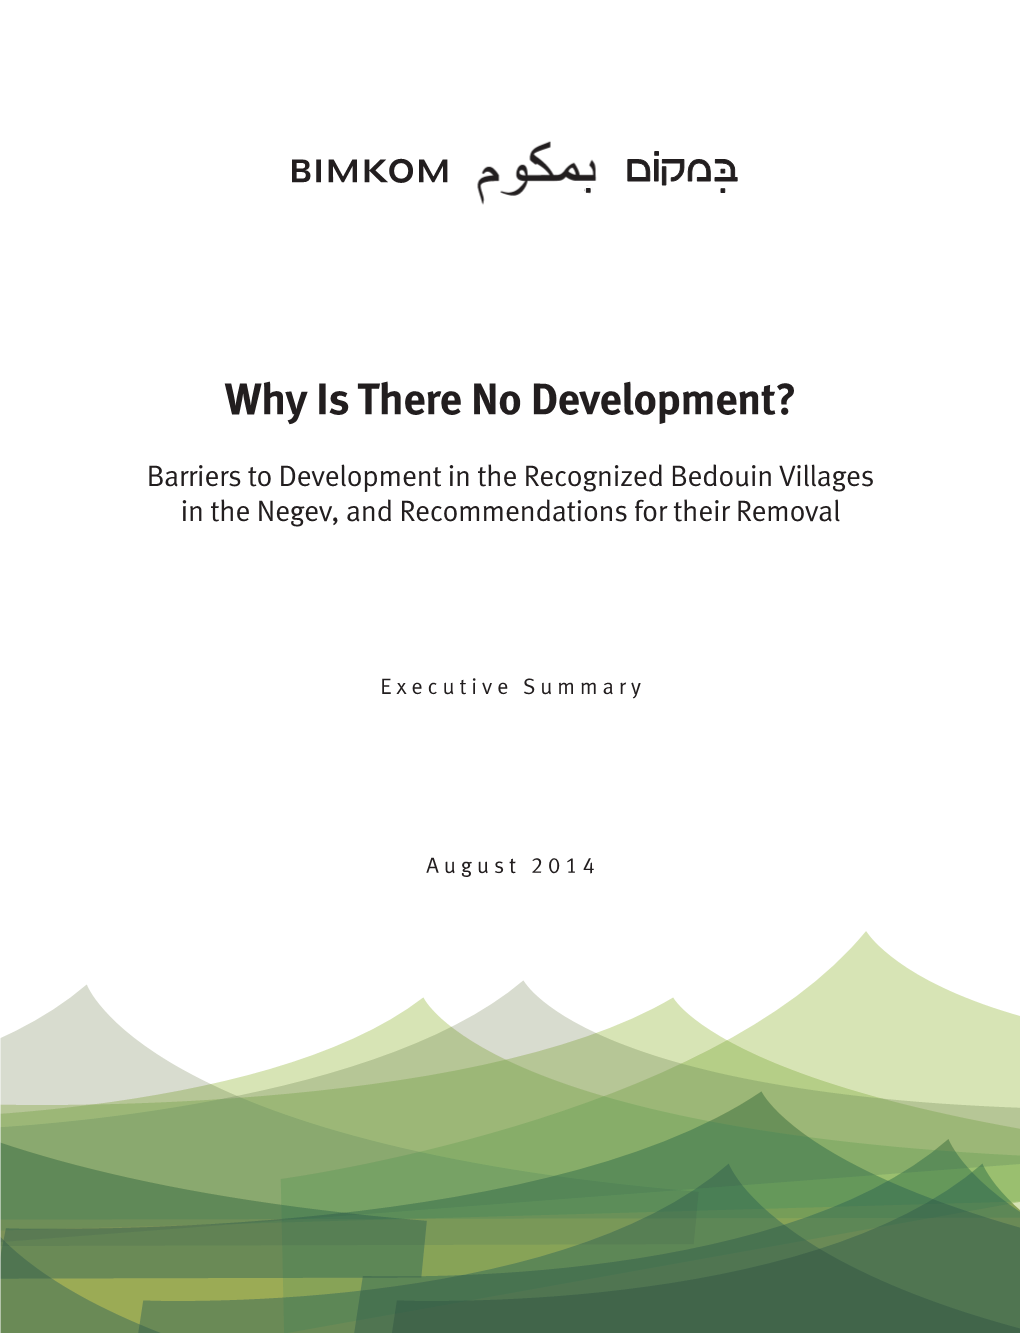 Why Is There No Development? A.02-5660551 Fax